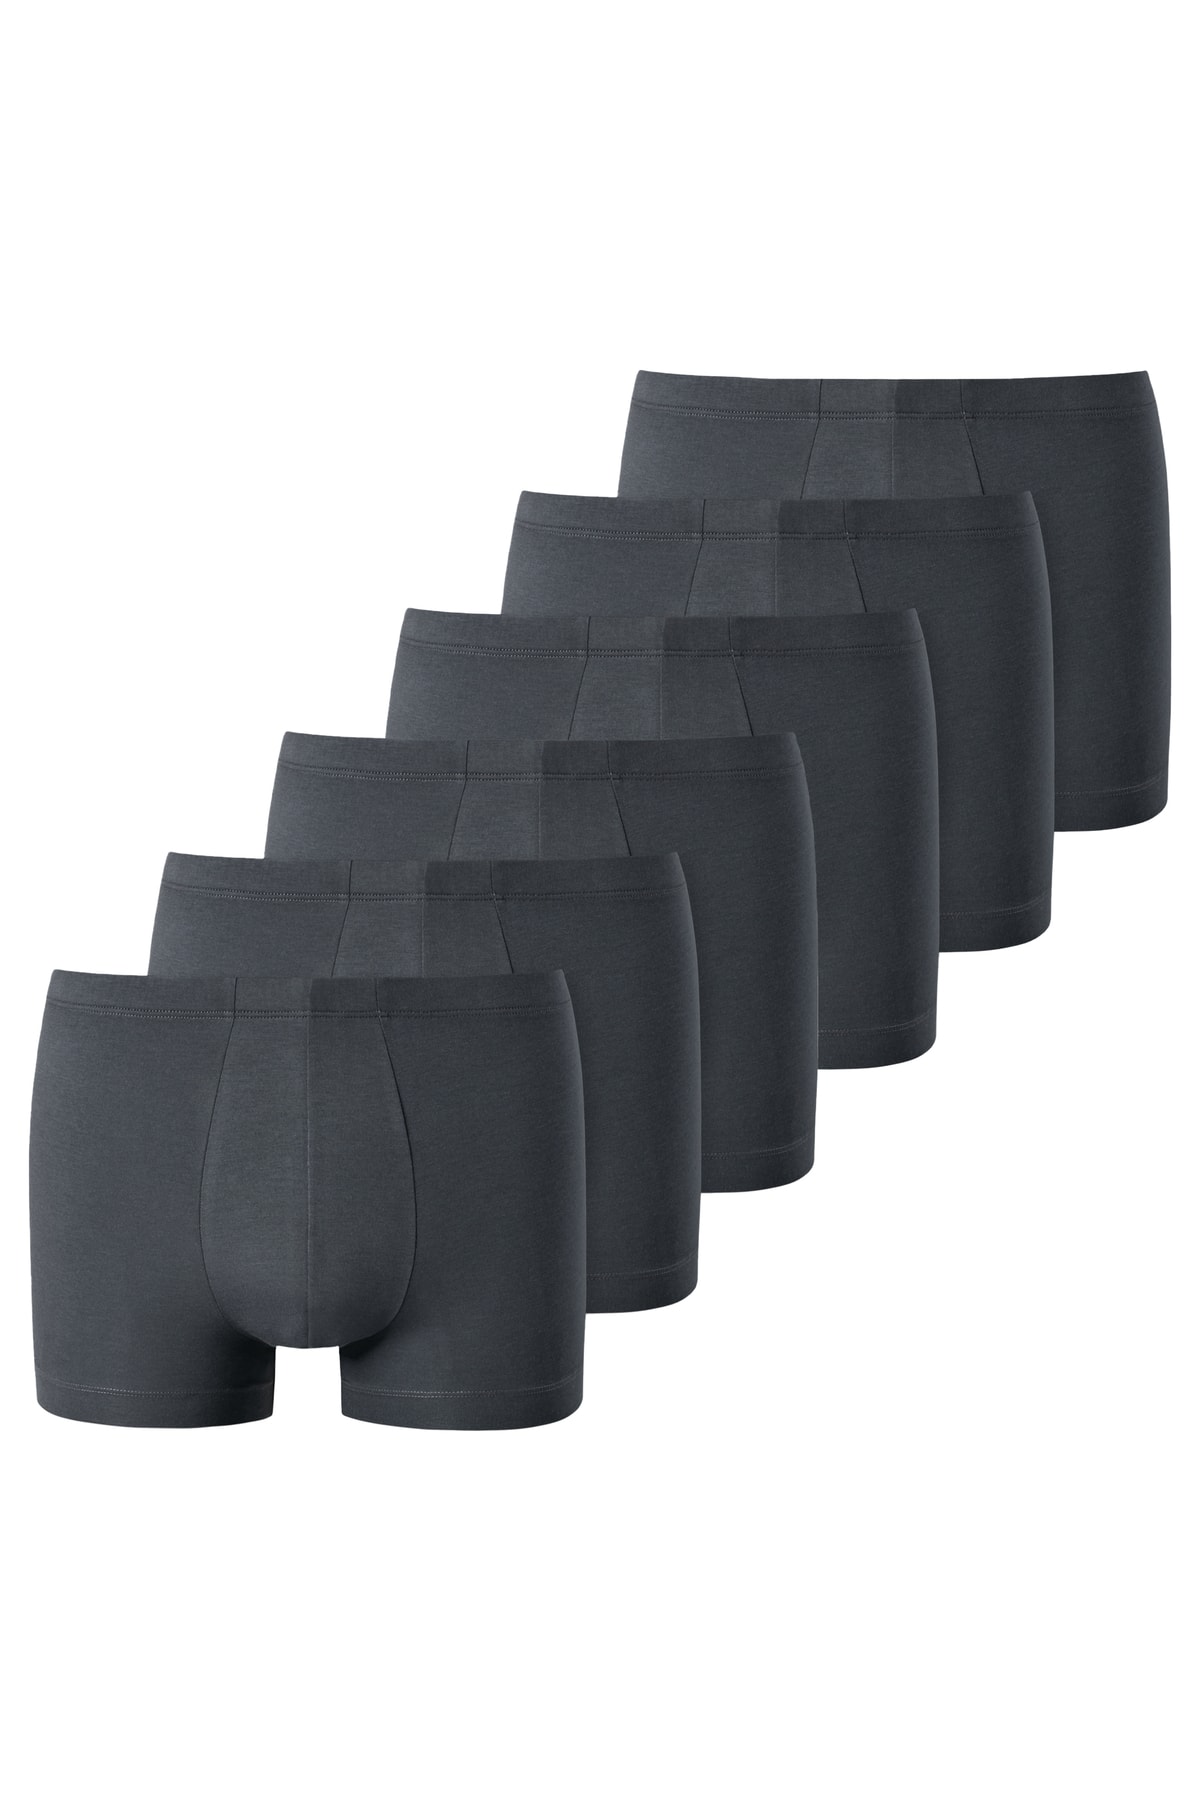 uncover by Schiesser Boxershorts Grau 6er-Pack